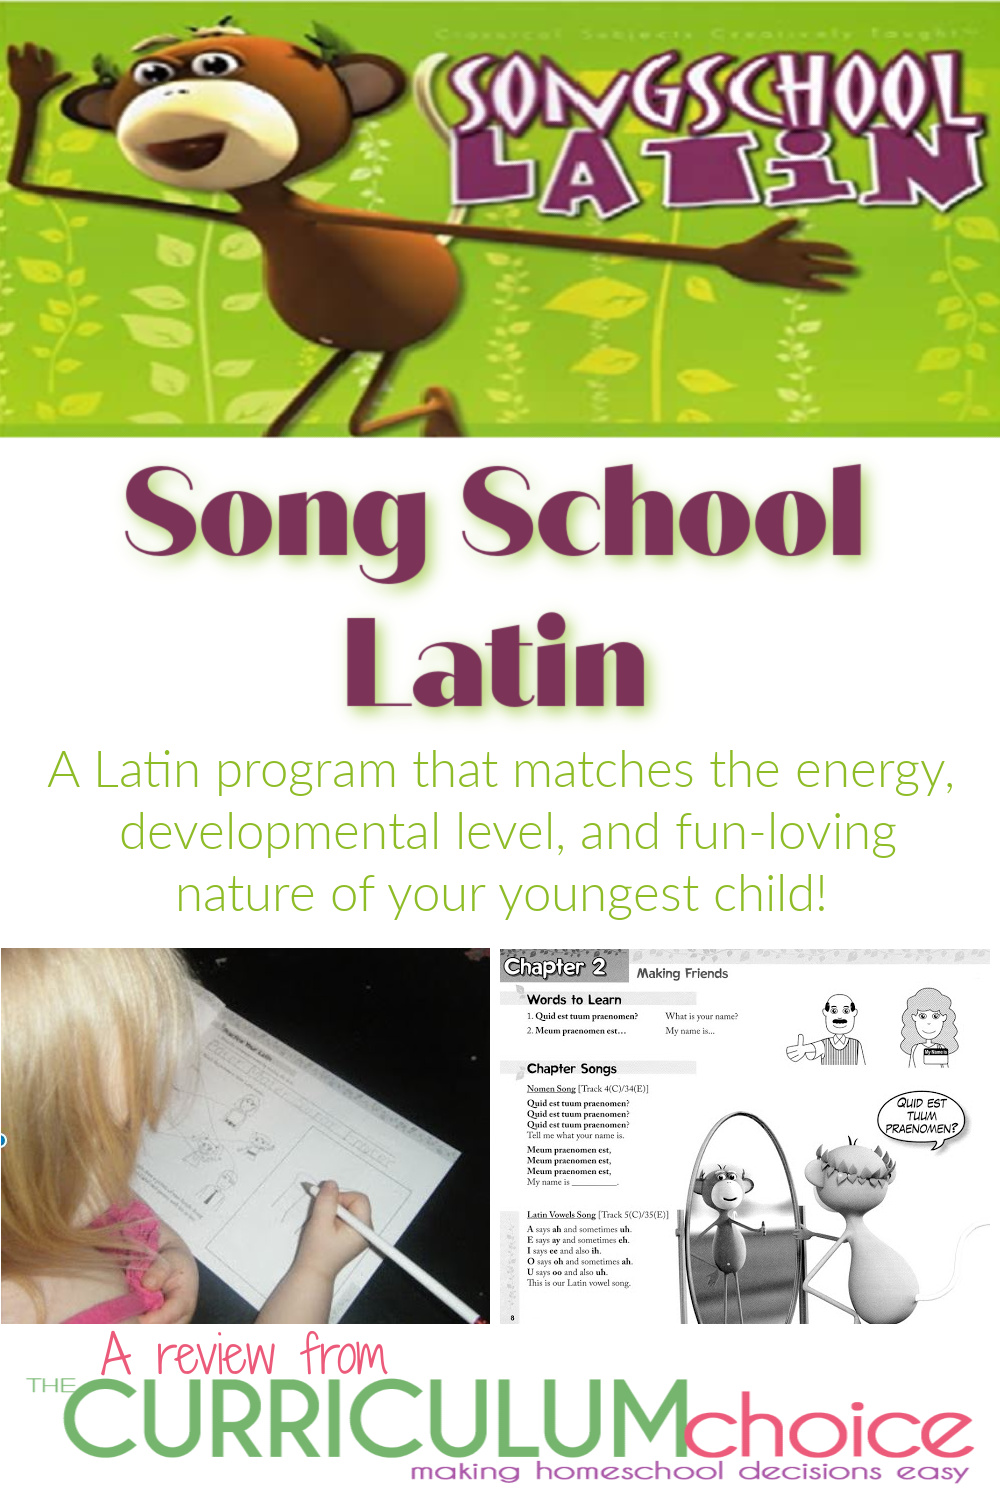 Song School Latin is an amazingly fun, full year homeschool program designed to teach your youngest students Latin. A review from The Curriculum Choice